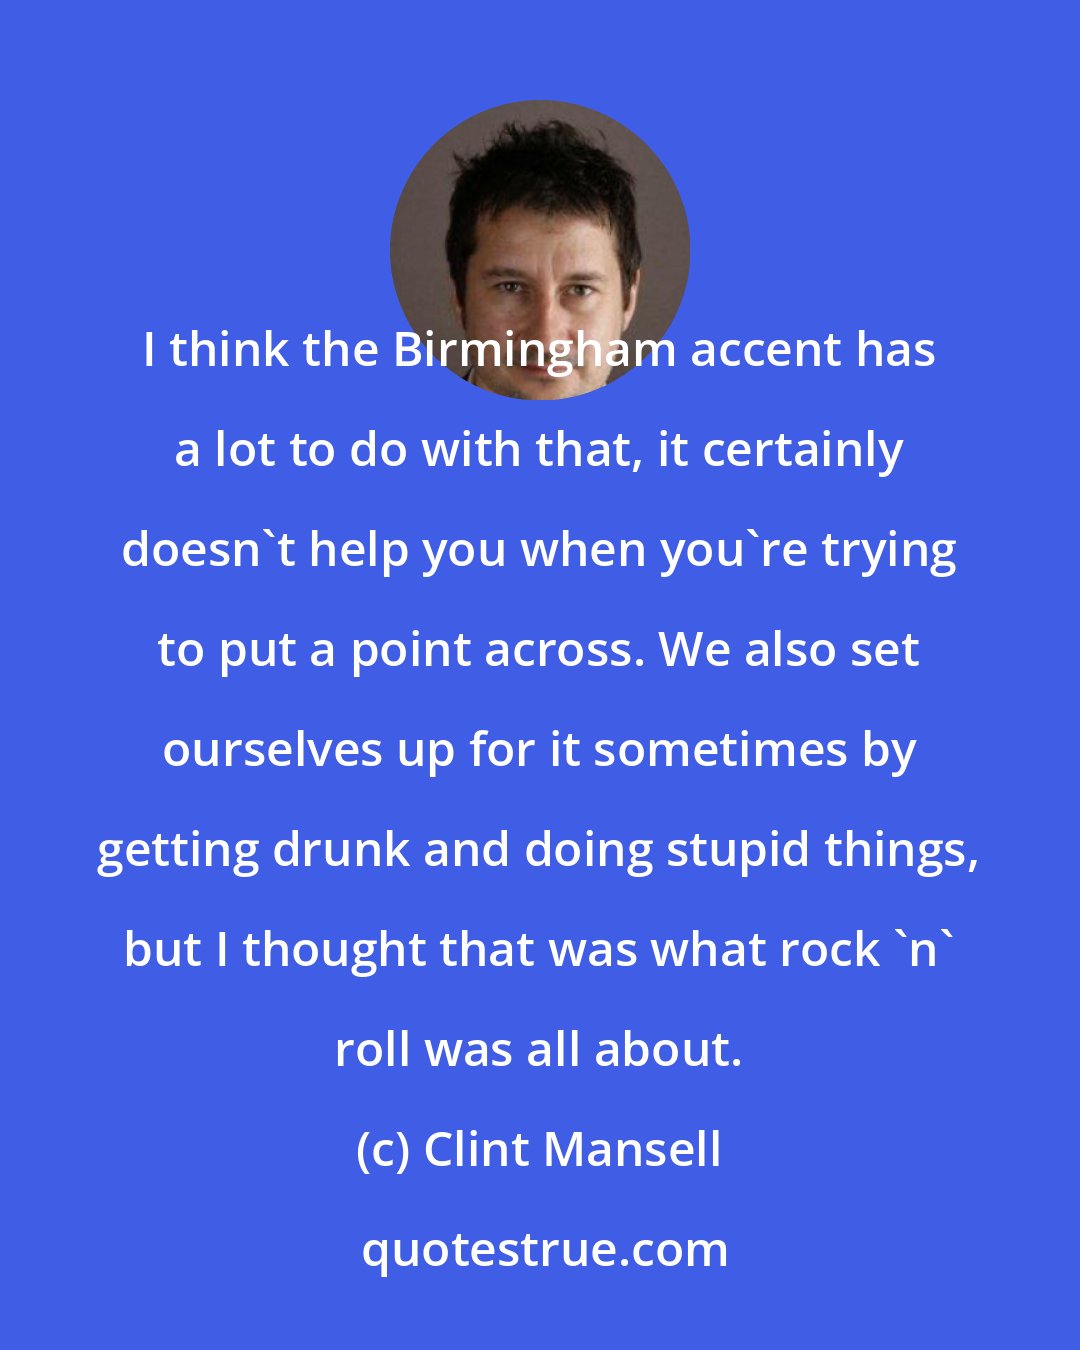 Clint Mansell: I think the Birmingham accent has a lot to do with that, it certainly doesn't help you when you're trying to put a point across. We also set ourselves up for it sometimes by getting drunk and doing stupid things, but I thought that was what rock 'n' roll was all about.